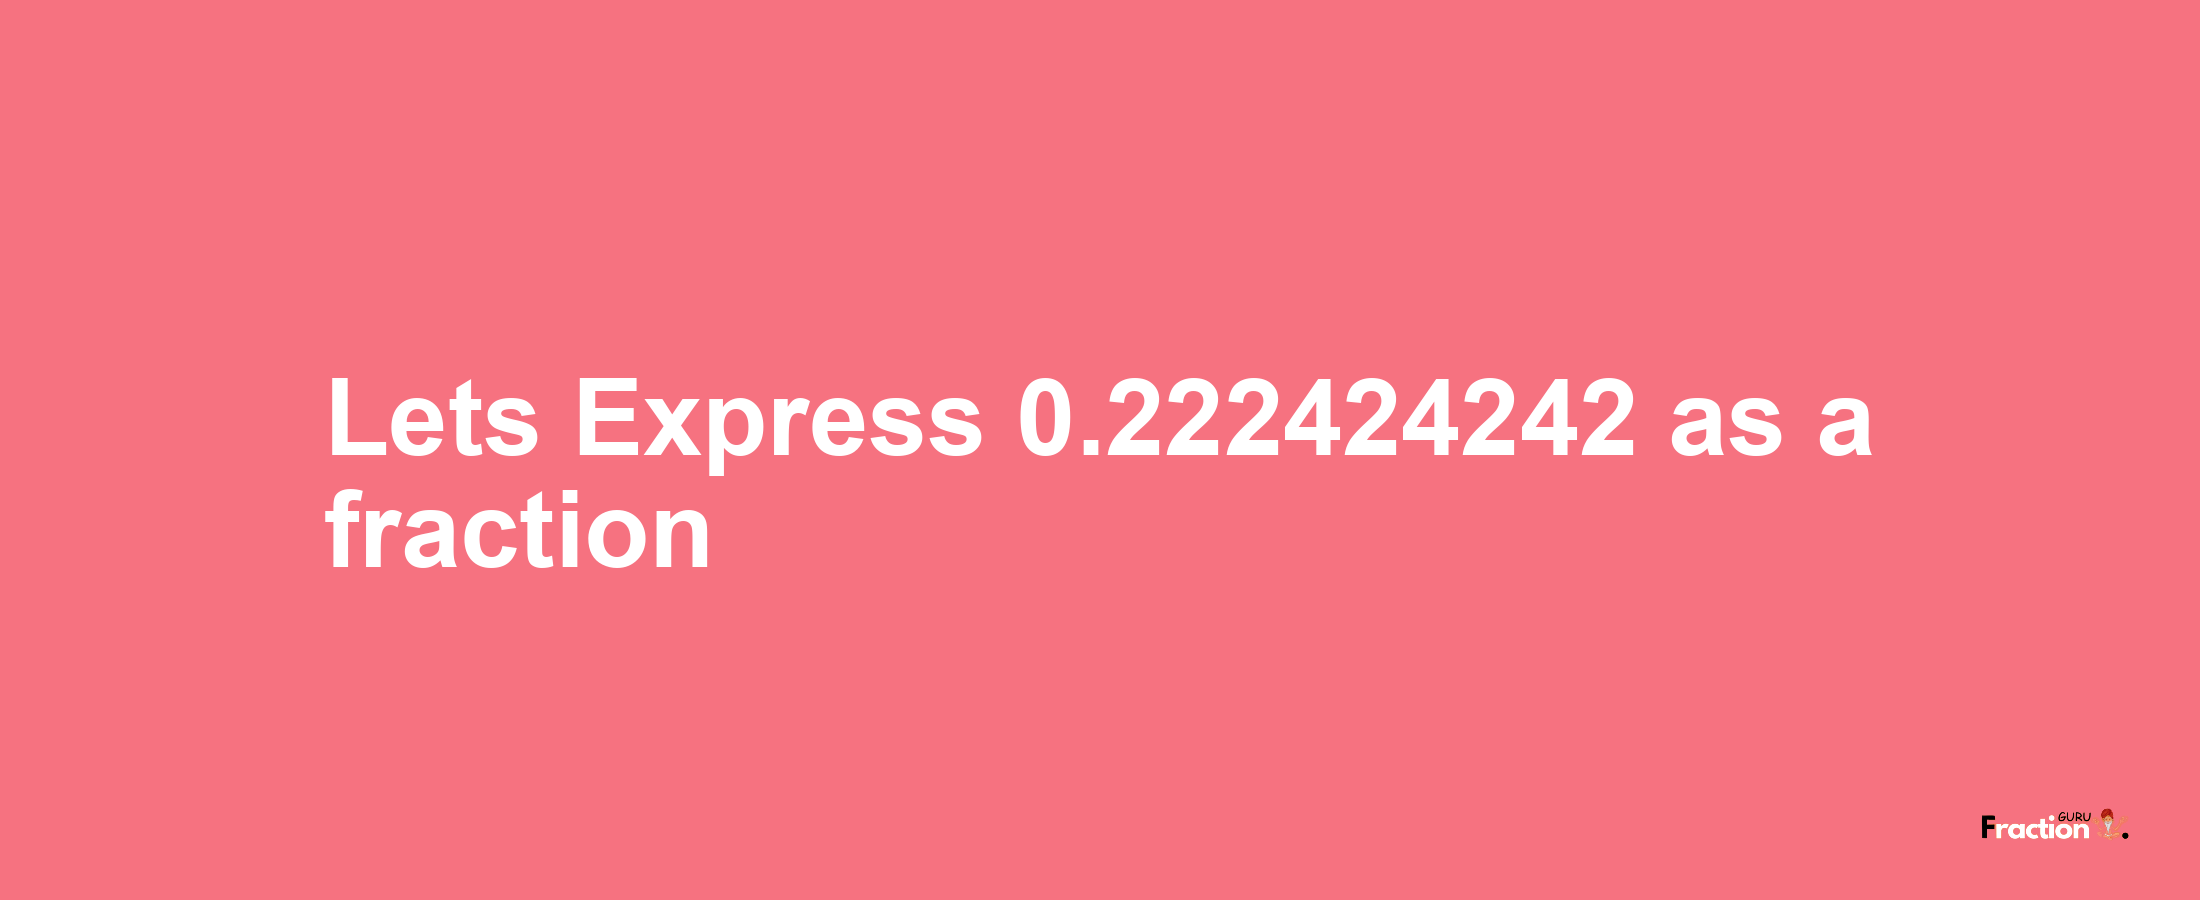 Lets Express 0.222424242 as afraction